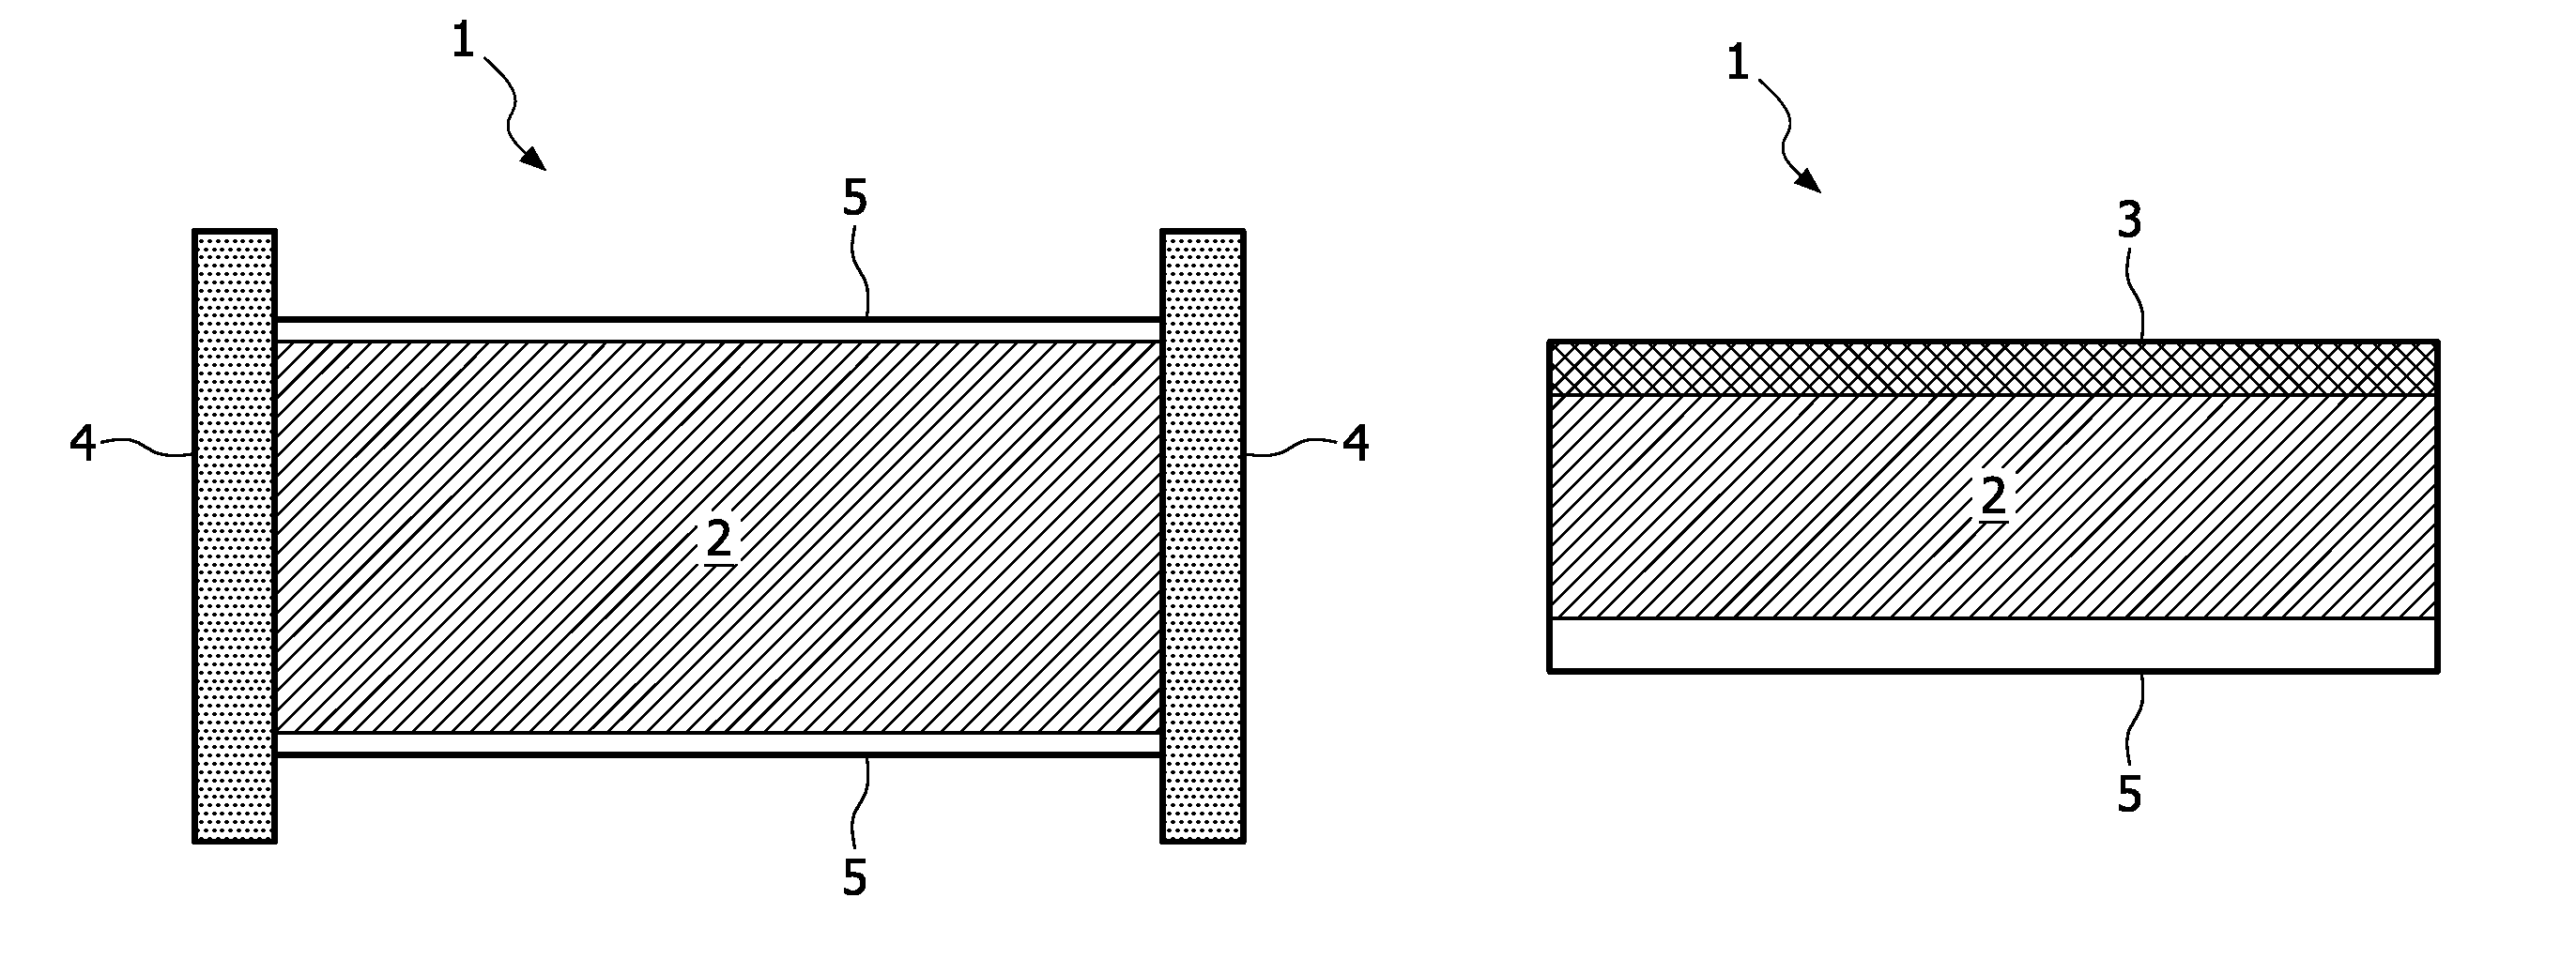 Luminescent photovoltaic generator and a waveguide for use in a photovoltaic generator